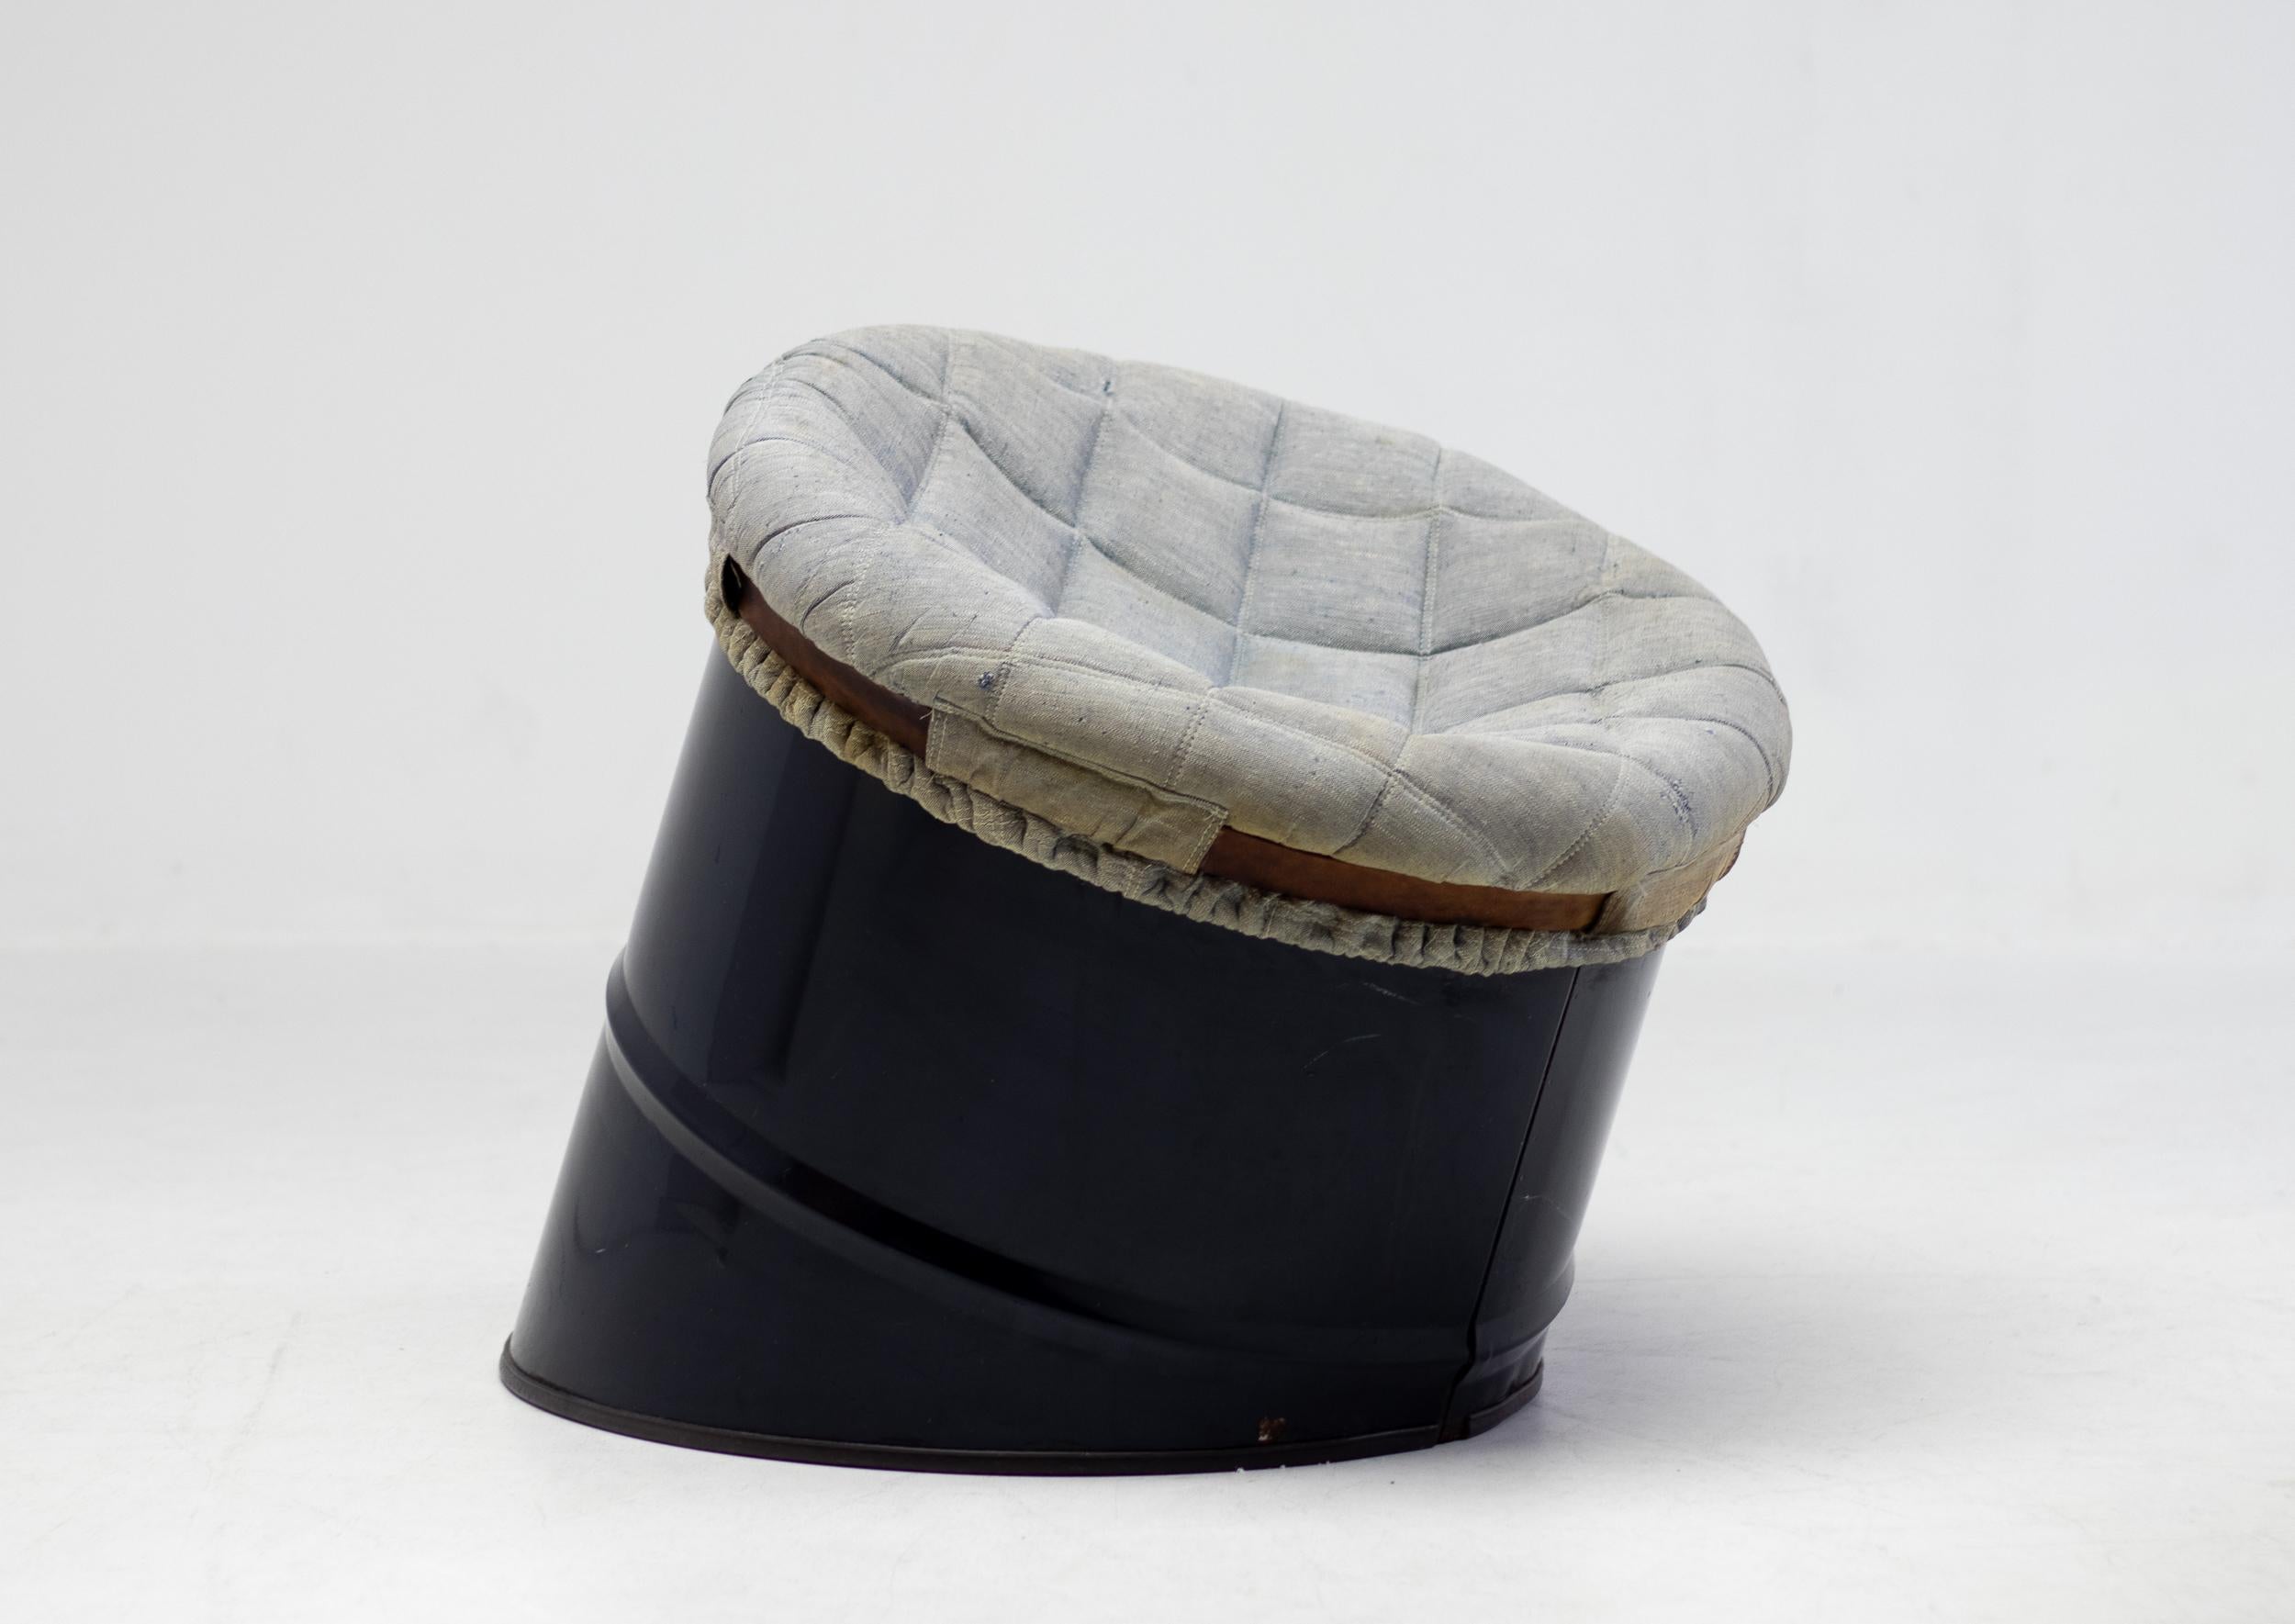 Unique avant-garde piece made by Studio Simon, Italy. 
A dark blue steel oil drum cut diagonally and upholstered with a foam filled seat that is attached to the drum by a leather belt. In all original unrestored condition.
Marked at the bottom of